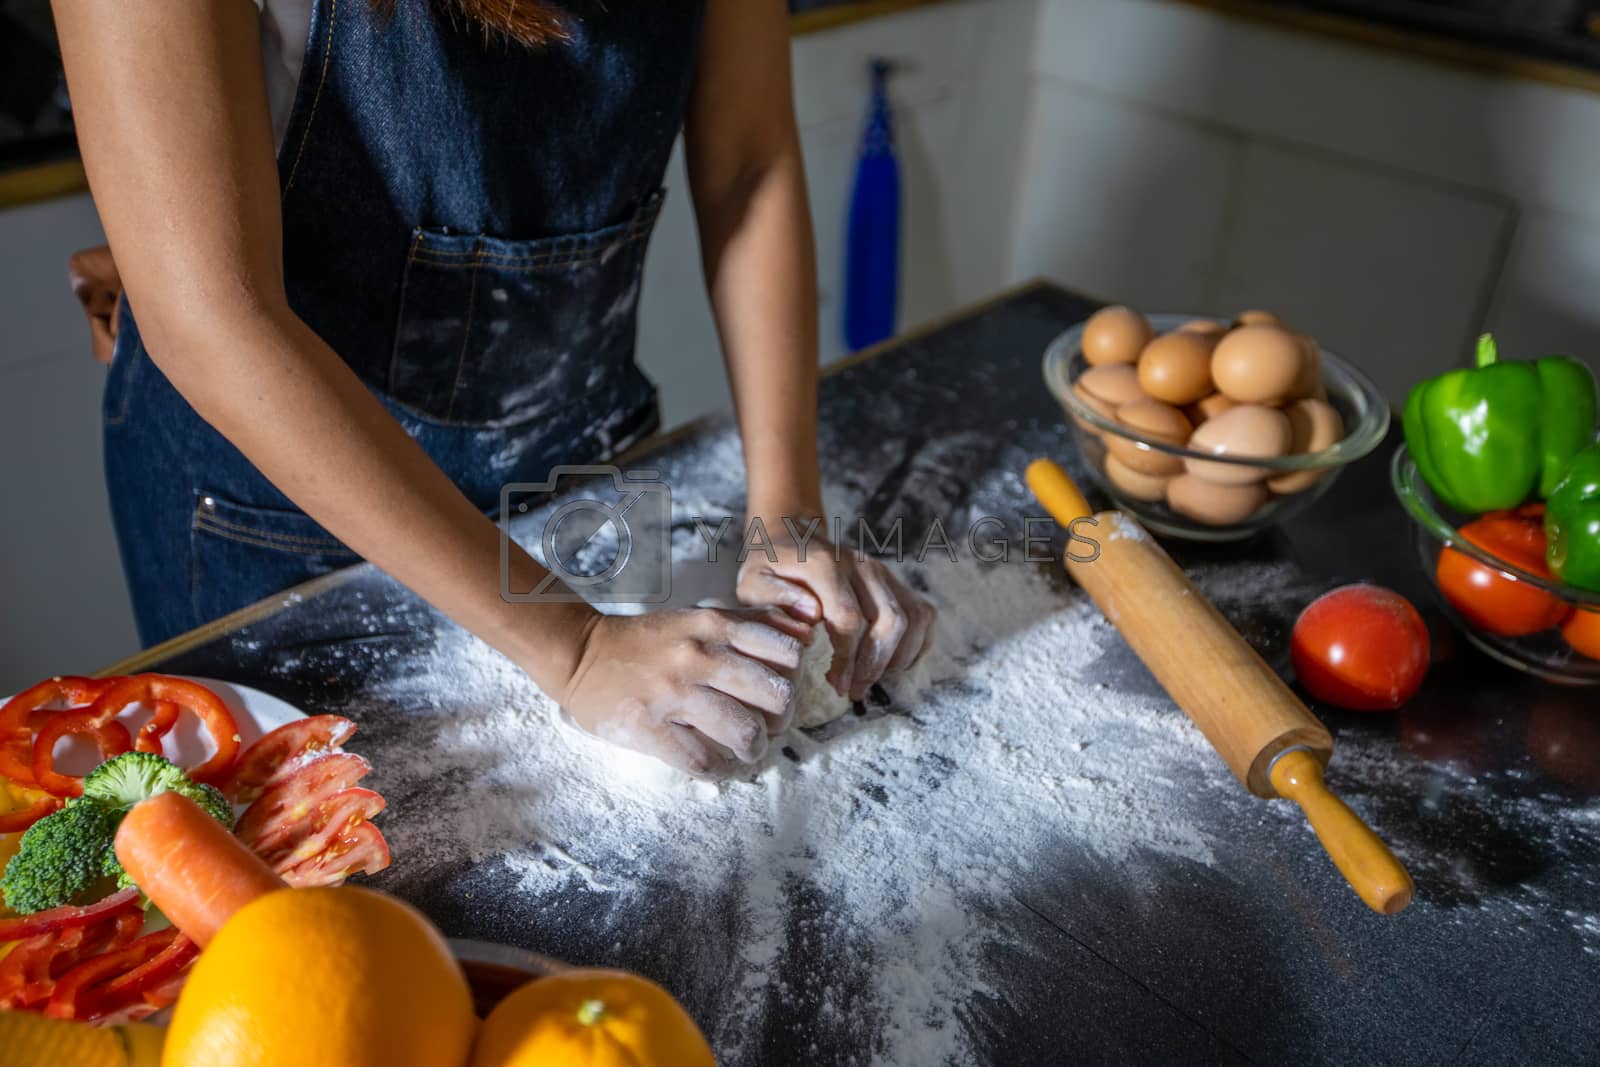 Royalty free image of Asian women preparing a pizza, knead the dough and puts ingredie by Tuiphotoengineer